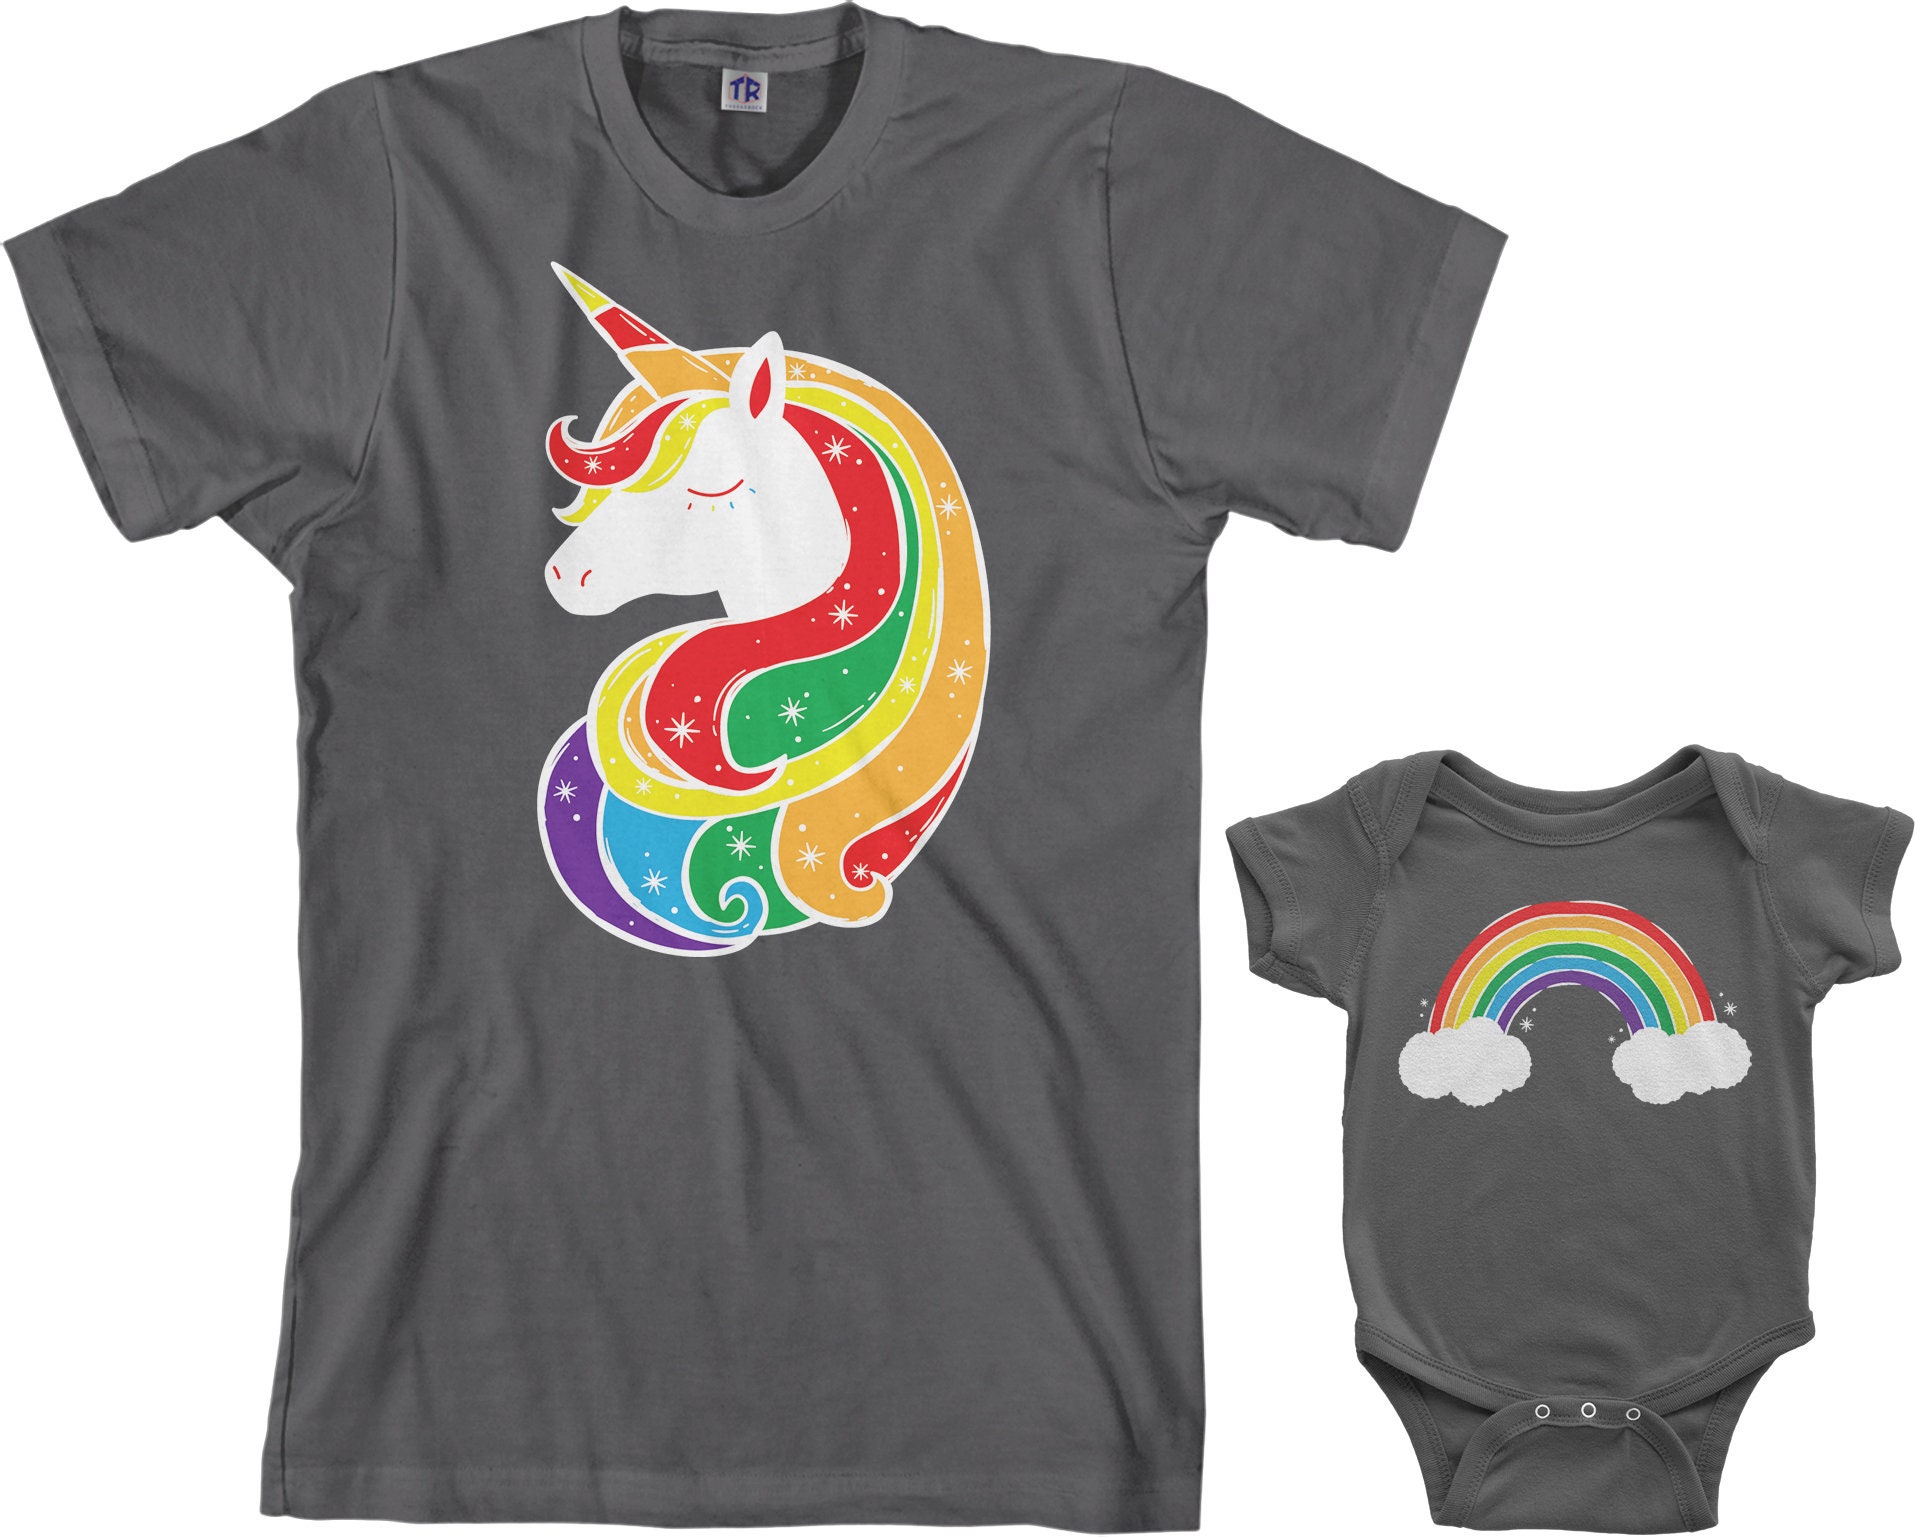 Discover Unicorn & Rainbow Men's T-shirt and Infant Bodysuit Dad and Baby Matching Set